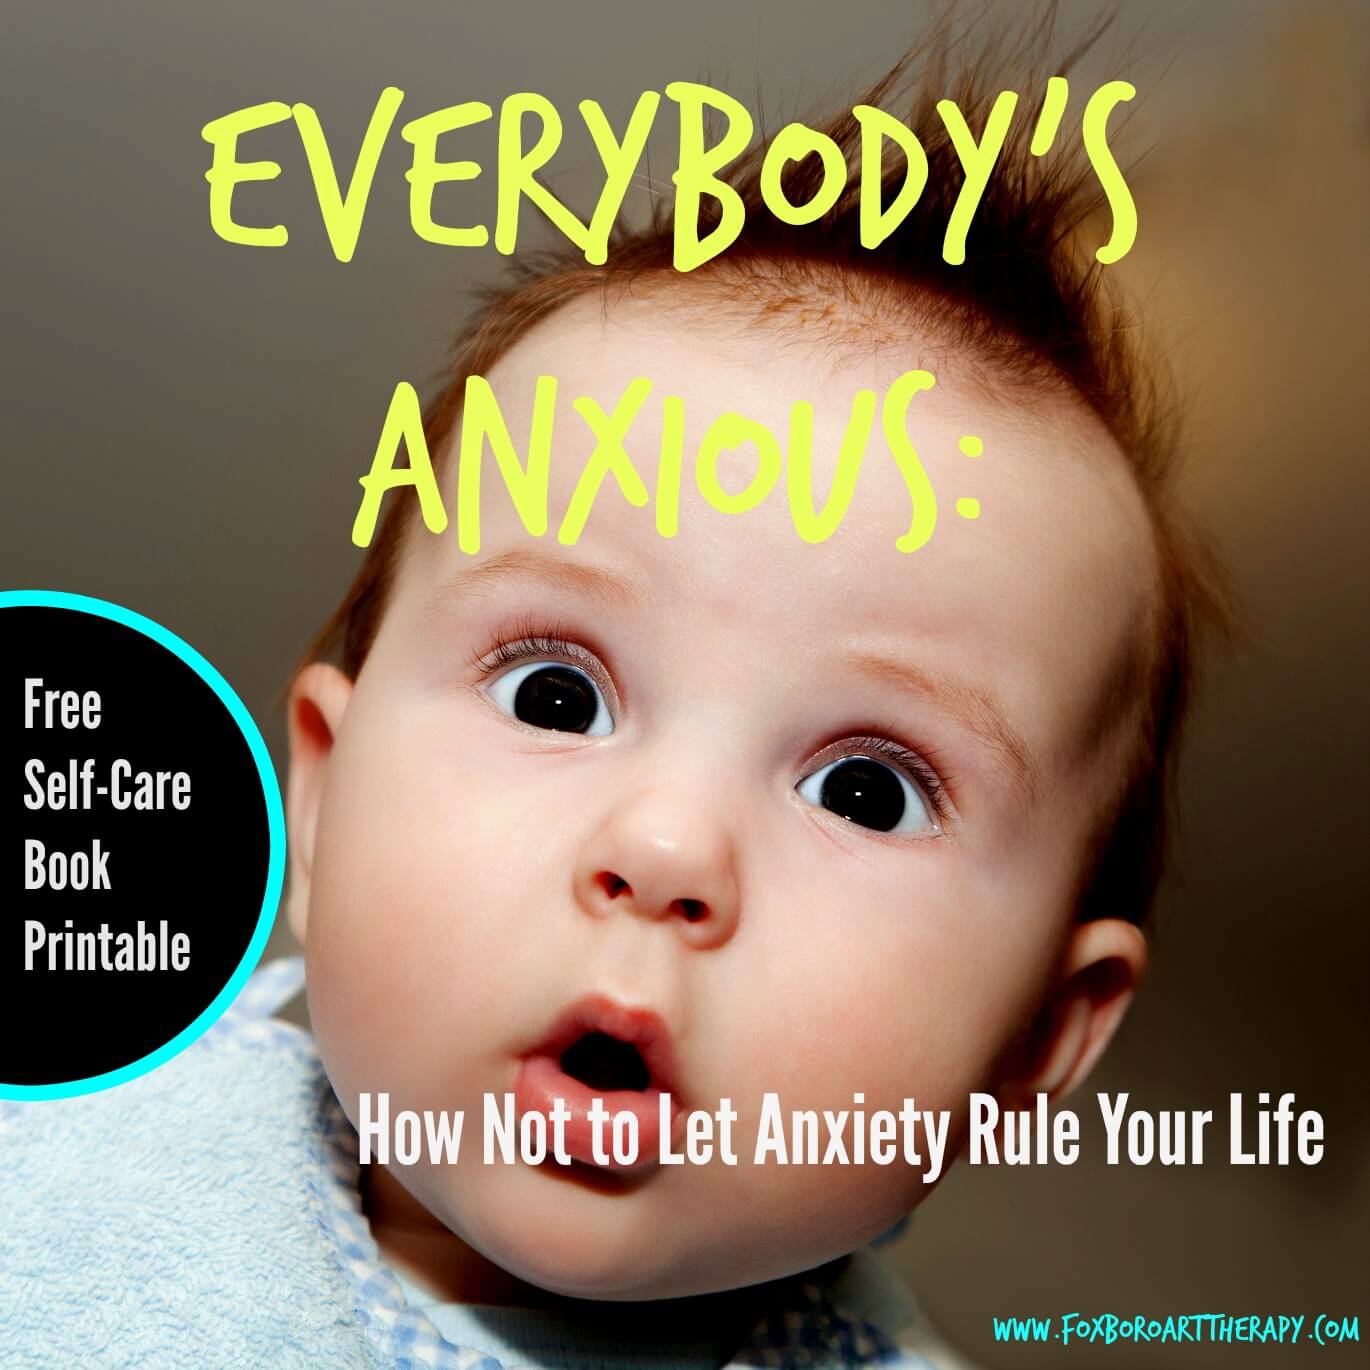 Everybodys Anxious: How Not to Let Anxiety Rule Your Life